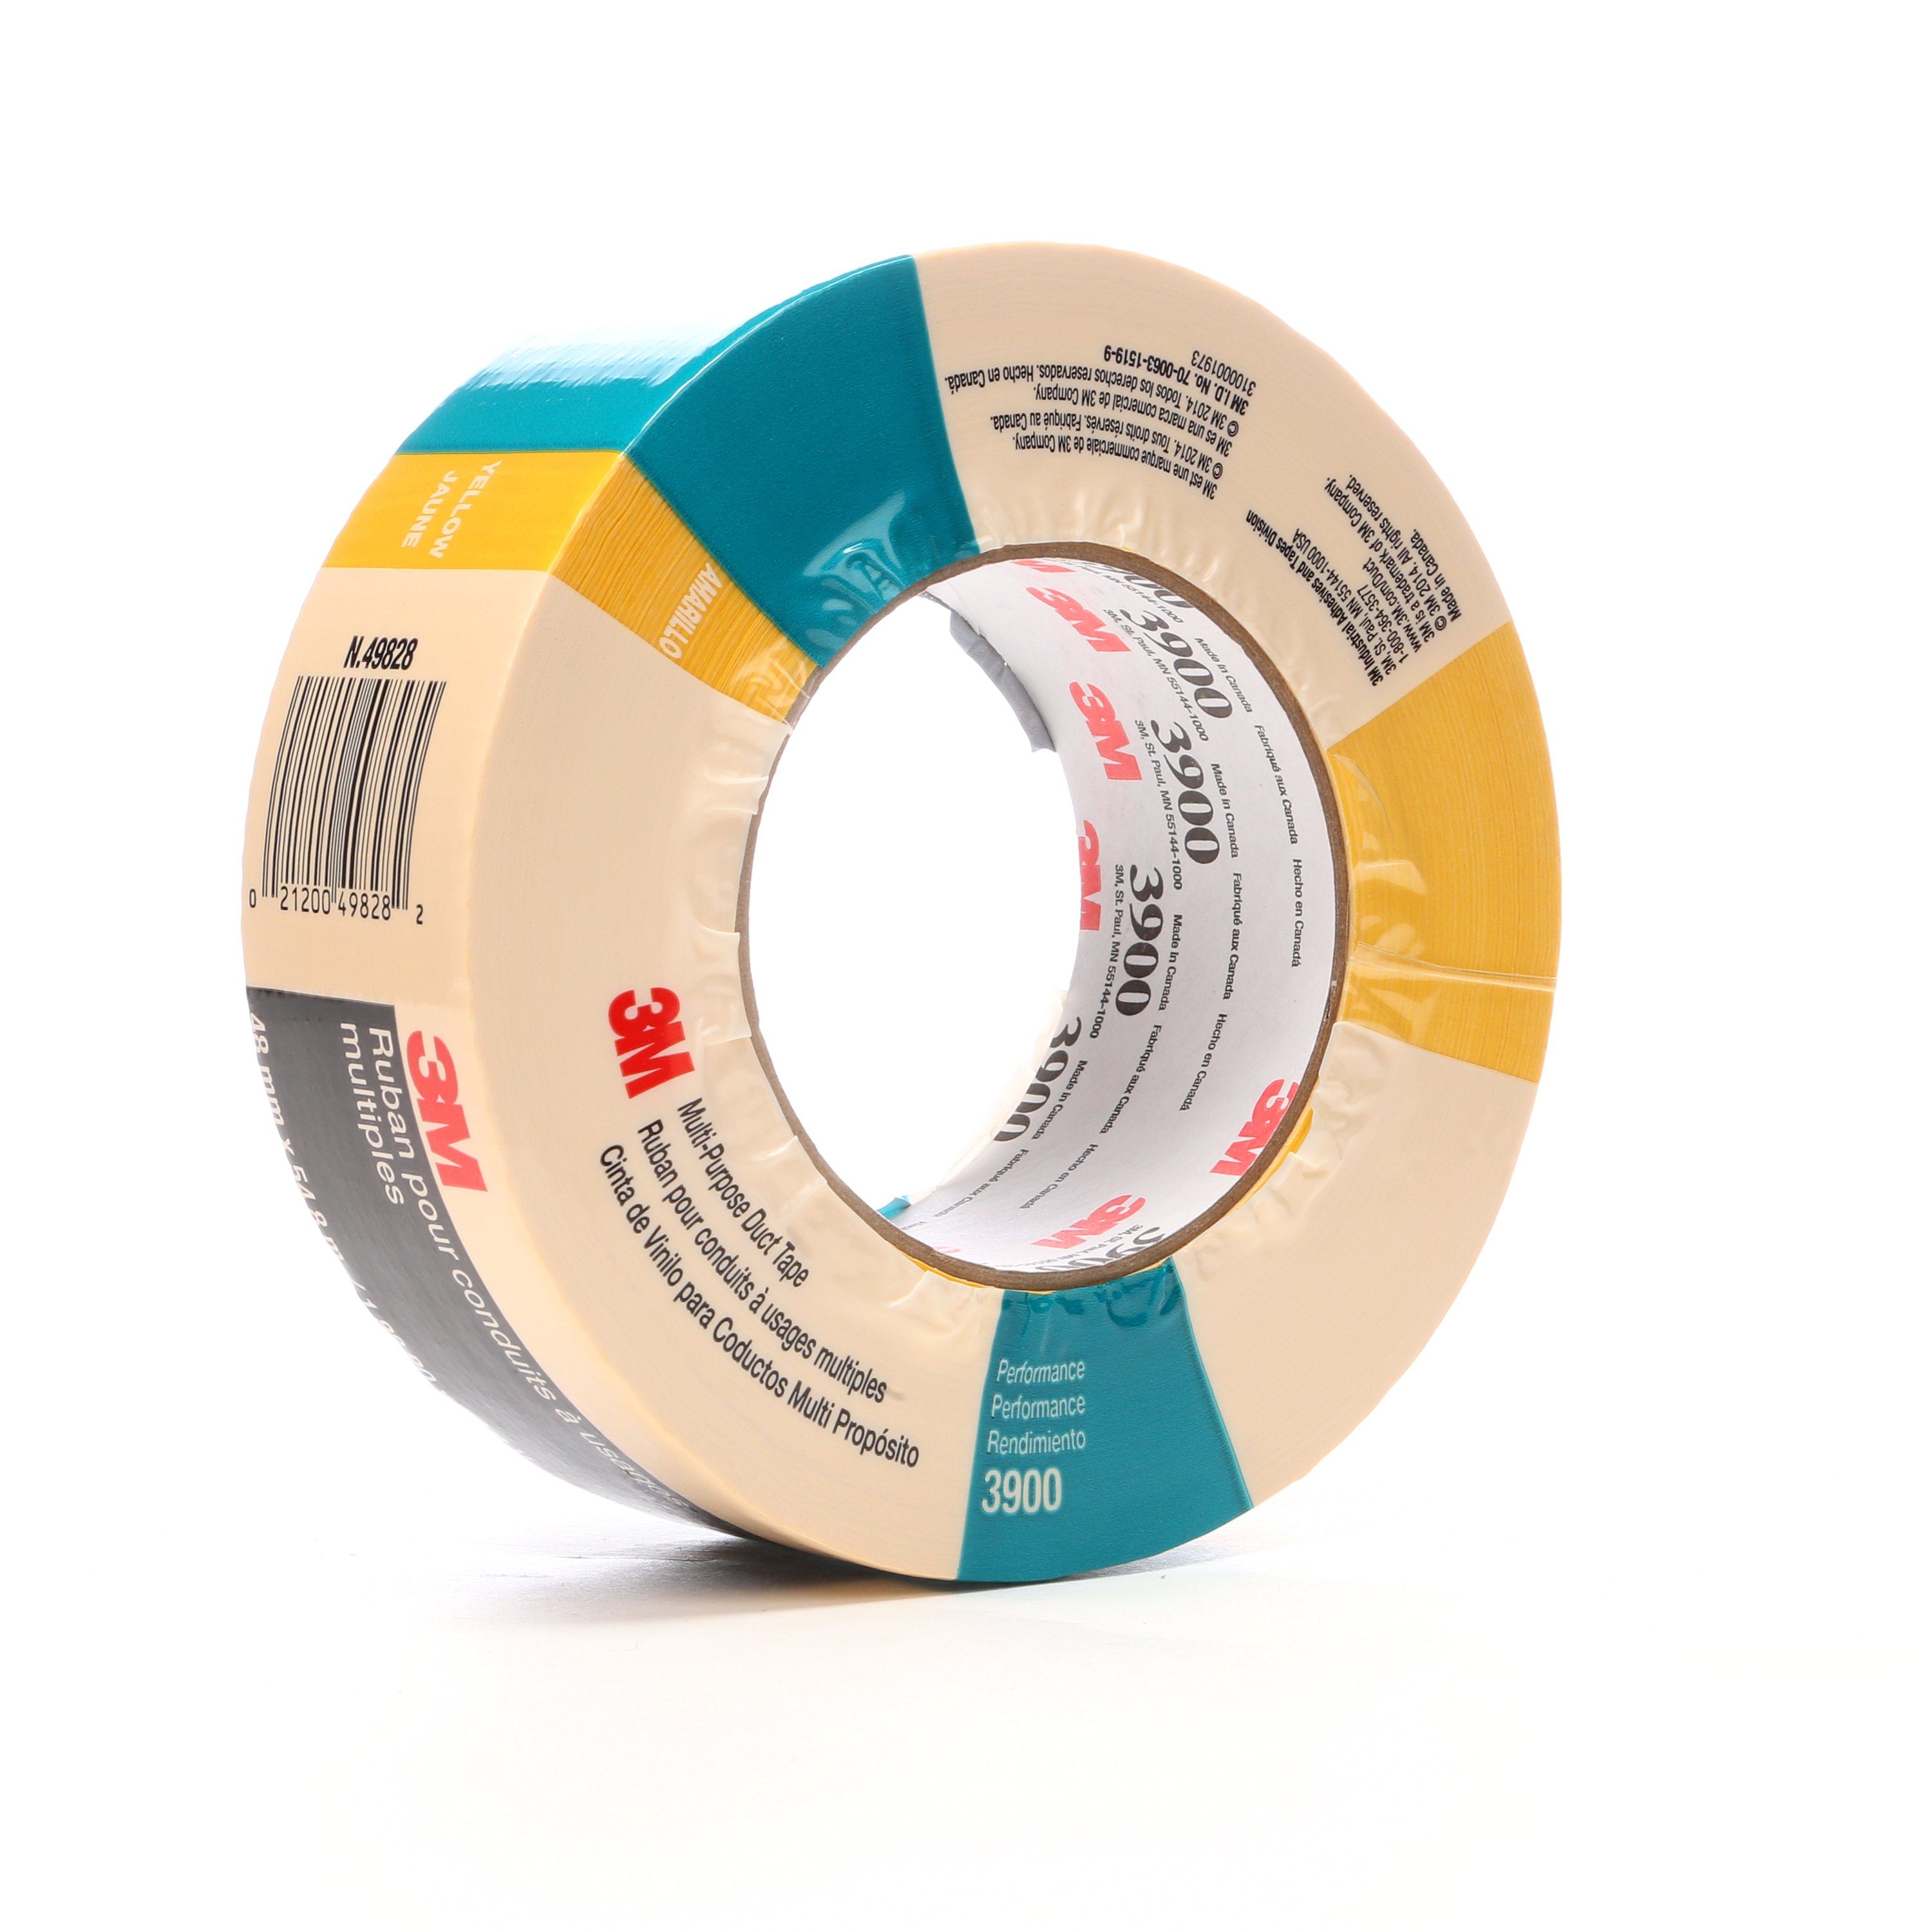 3M's family of rugged cloth and duct tapes adheres to most surfaces for applications ranging from bundling to moisture proofing, sealing to splicing, reinforcing to hanging poly drapes. 